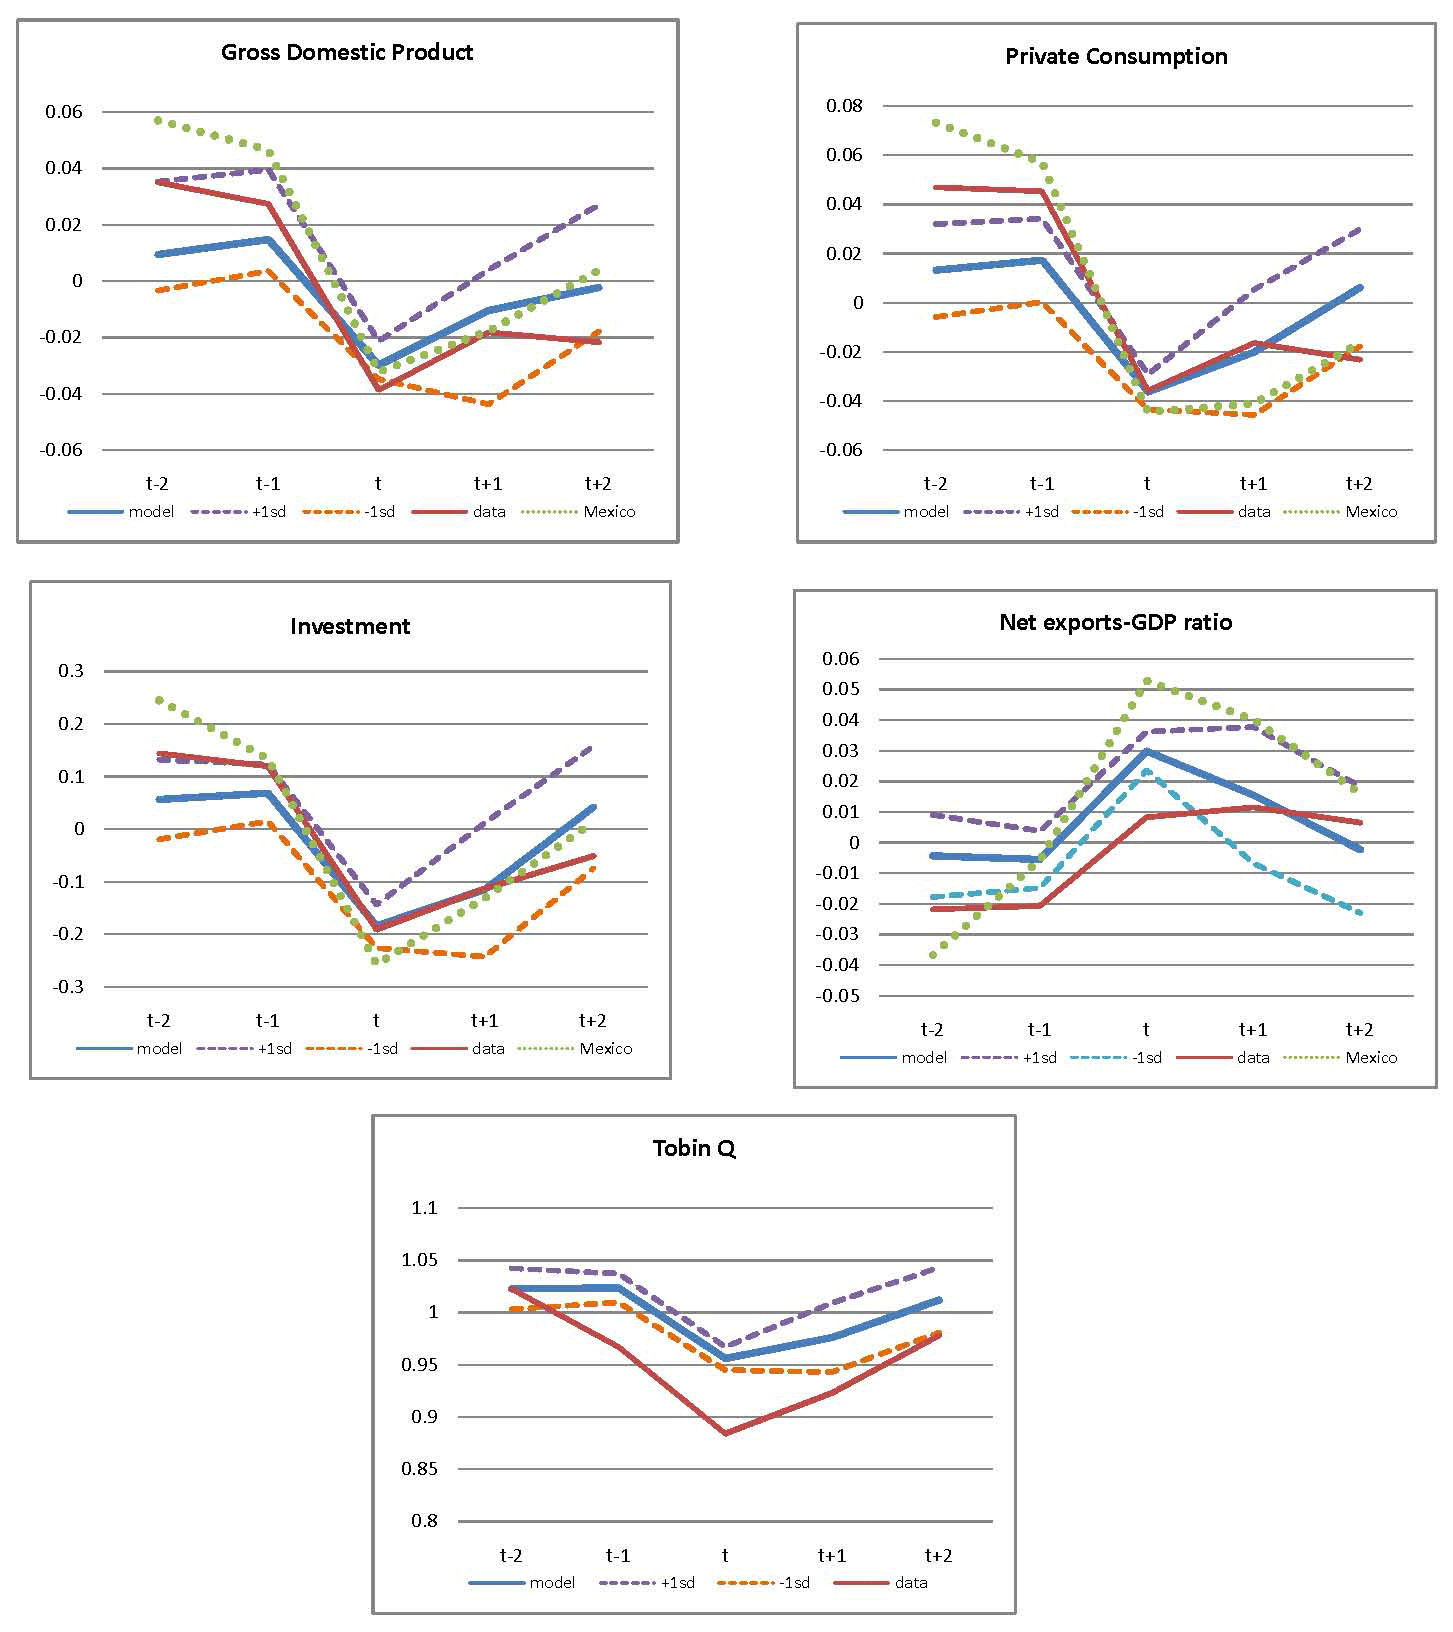 Figure 2 compares Sudden Stop events in the data and in the model simulations. The figure shows five panels organized in the same way as in Figure 1 (with the same ordering of variables, and the same labeling of horizontal and vertical axes). Each panel includes a line that plots the same data as in Figure 1, and in addition it compares the evolution of the actual data with four additional lines included in each plot. One line represents the median of HP filtered data from the model simulations, two other lines show +1 and -1 standard deviations from the mean of the model simulations, and the fourth line is the data from Mexicos 1994-1995 Sudden Stop.